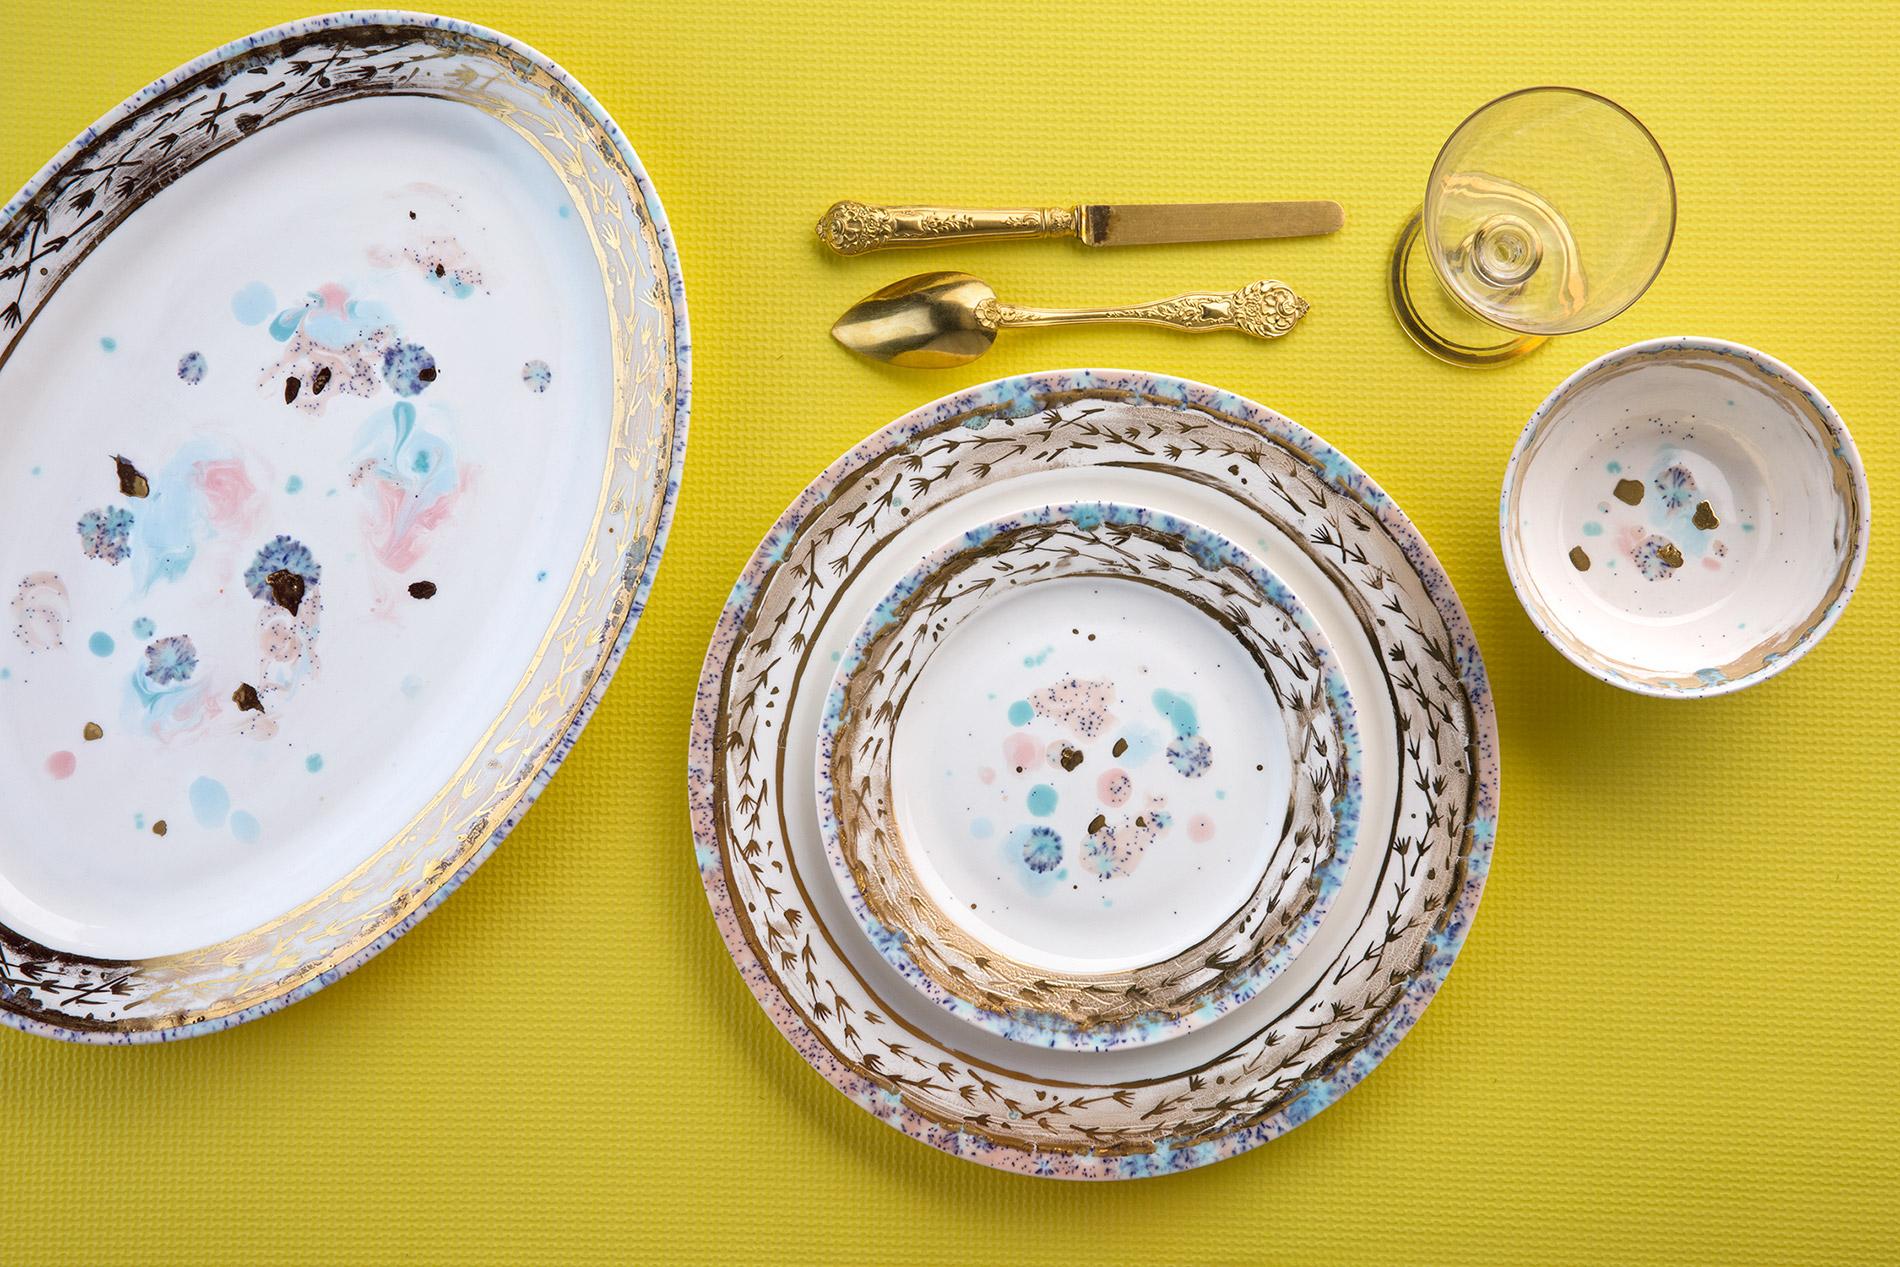 Hand painted in Italy from the finest porcelain, this Dafne Dessert Rim Plate has a narrow pink and blue dotted rim surrounding a broad, delicate golden decor of stylised flowers; subtle light blue and pink brushes sprinkled with black powder float